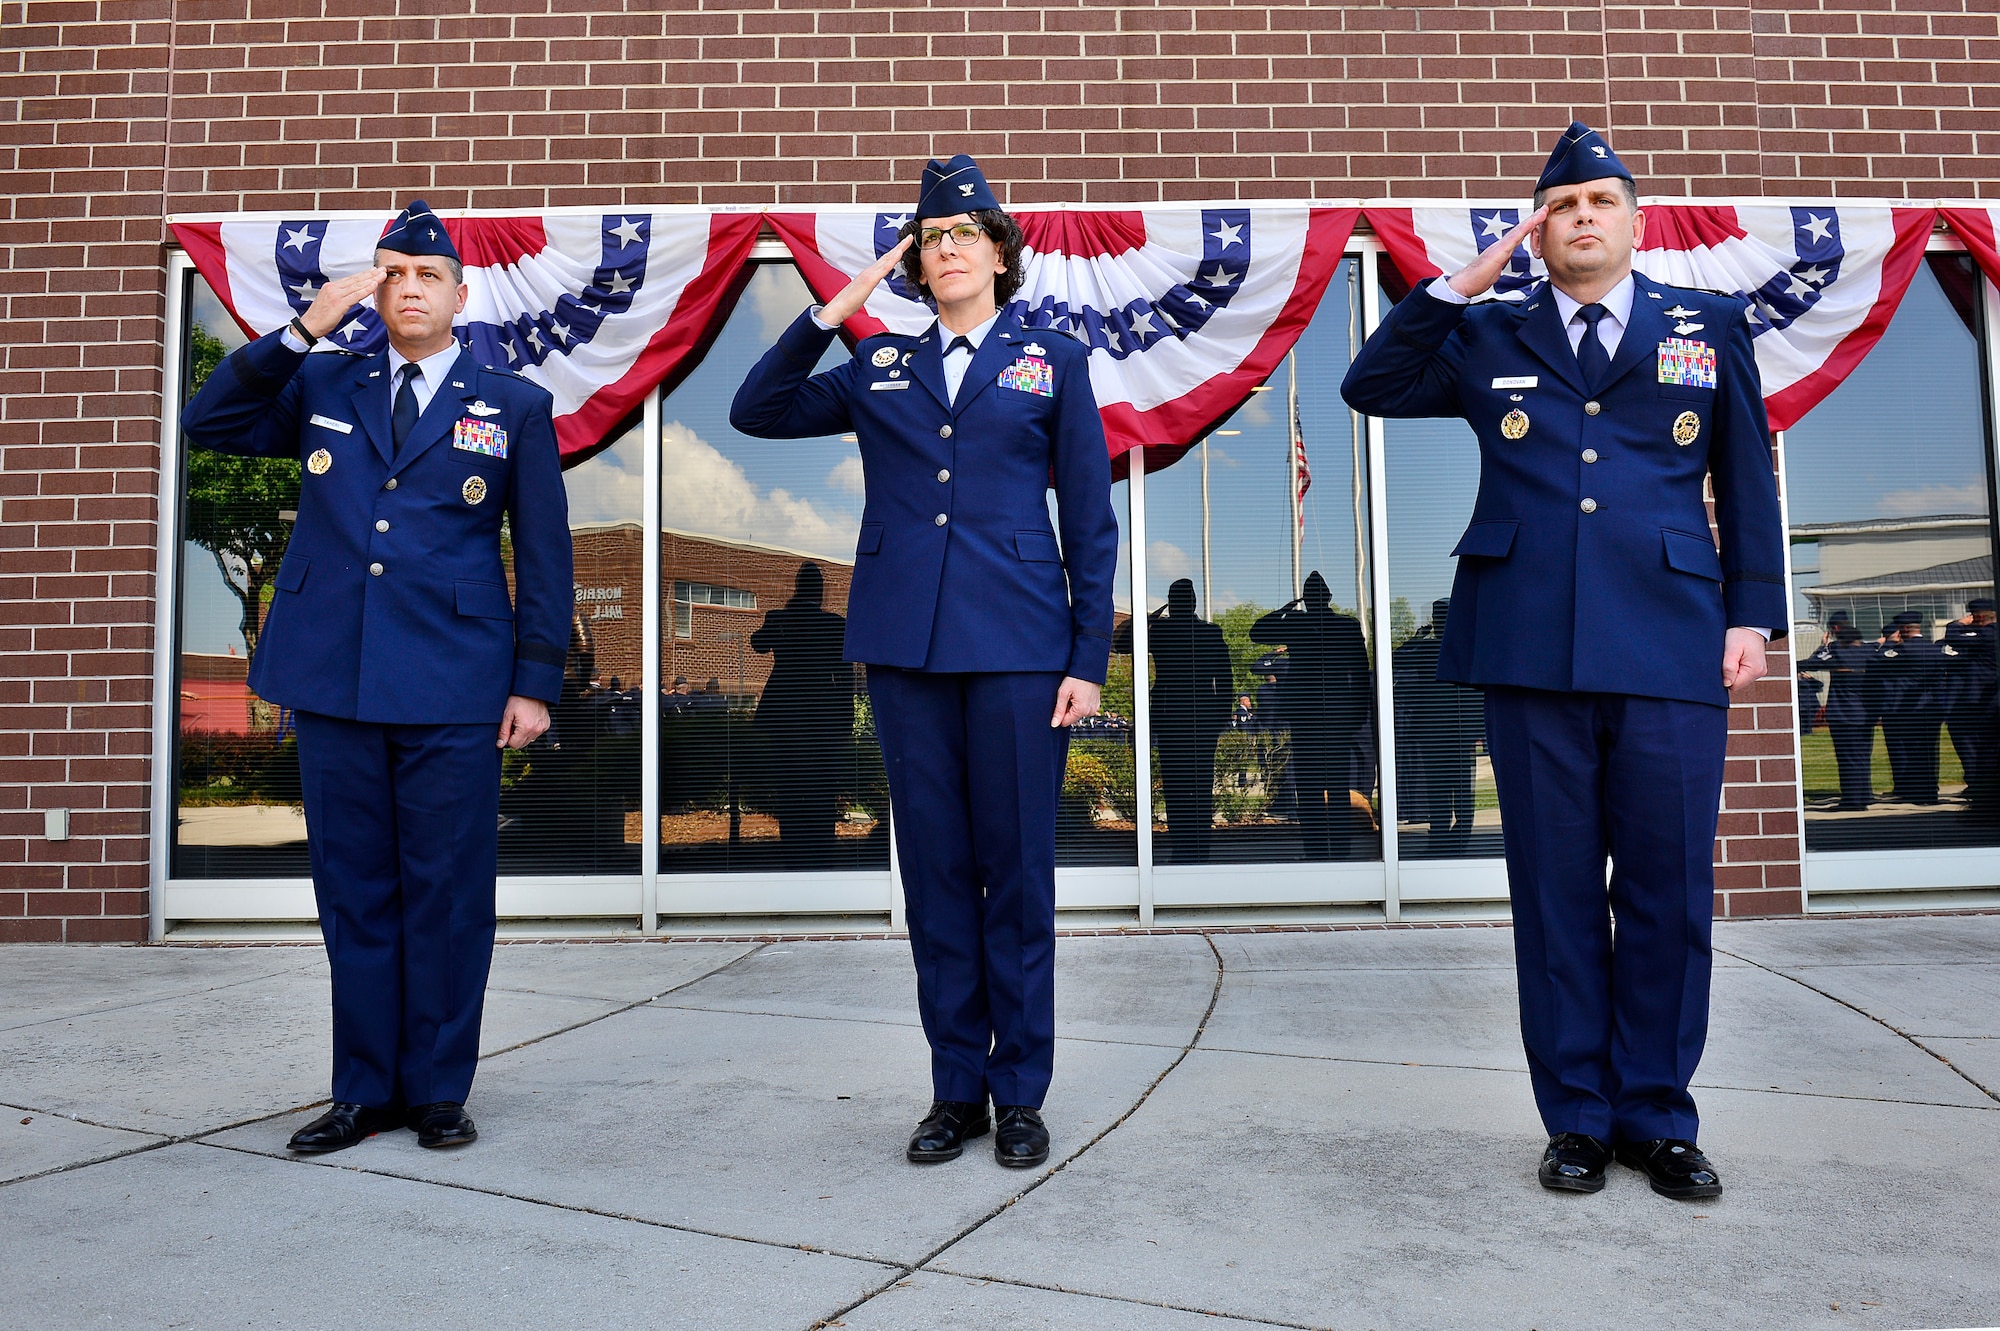 MCGHEE TYSON AIR NATIONAL GUARD BASE, Tenn. - From left, Brig. Gen. Michael R. Taheri, commander of the Air National Guard Readiness Center, Col. Jessica Meyeraan and Col. Kevin M. Donovan, salute during the retreat ceremony here, April 28, 2016, at the I.G. Brown Training and Education Center. Colonel Donovan took command of the TEC, April 29, from Meyeraan, who is reassigned as the chief of staff, joint staff, National Guard Bureau. (U.S. Air National Guard photo by Master Sgt. Jerry Harlan/Released)